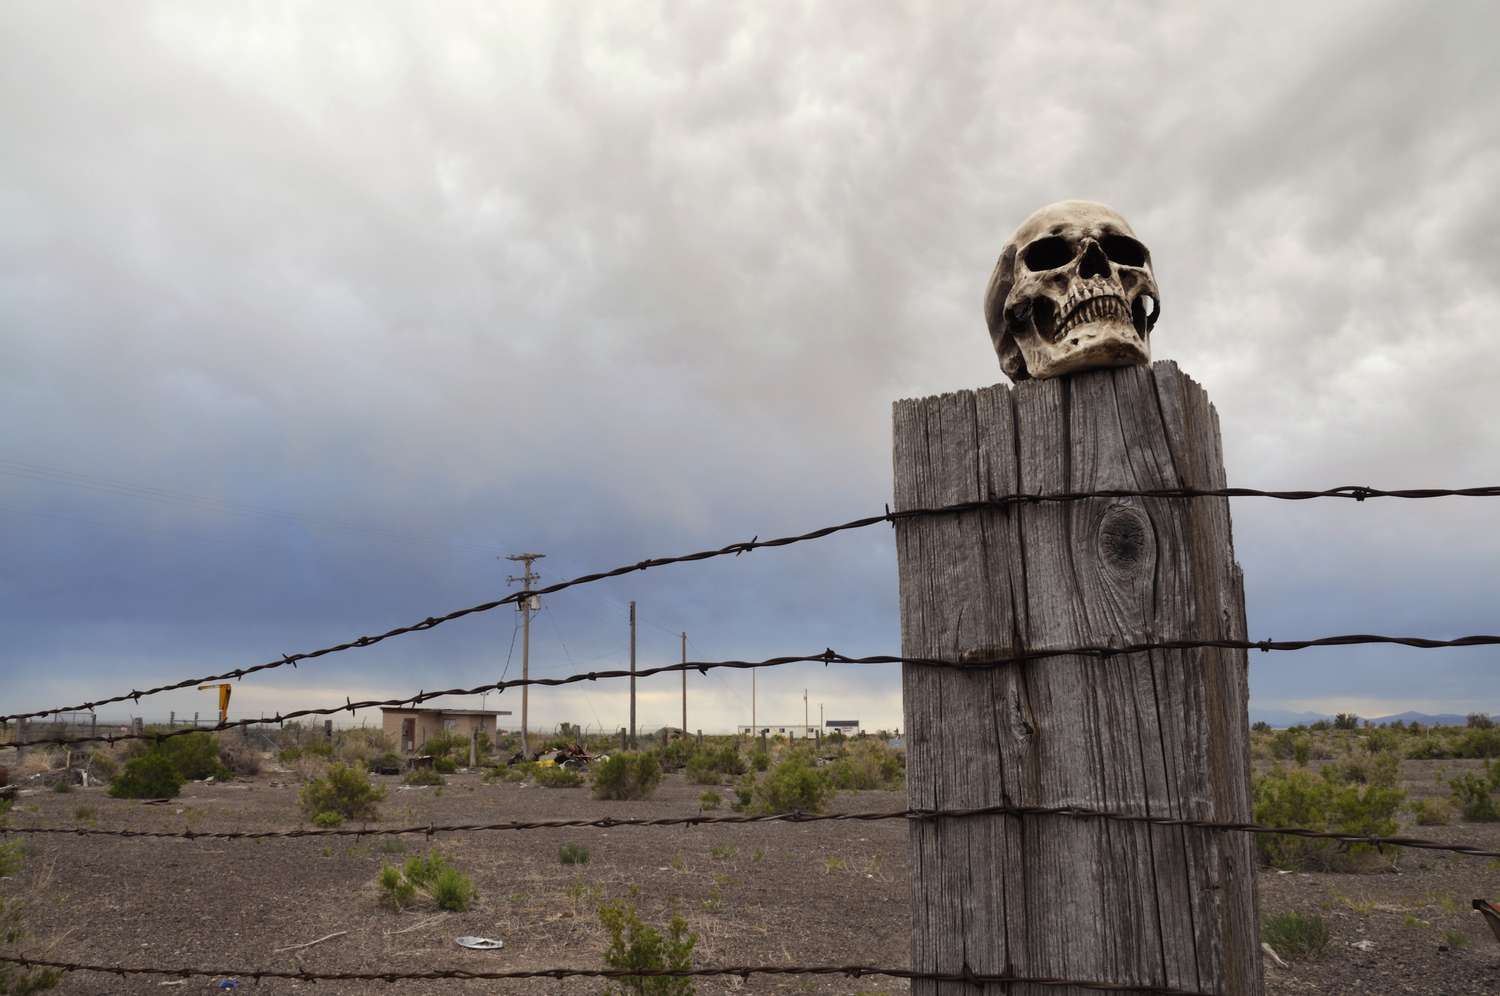 horizontal-color-photograph-of-skull-on-barbed-wire-fence-post-136382315-5c00636e46e0fb000162e5b1.jpg